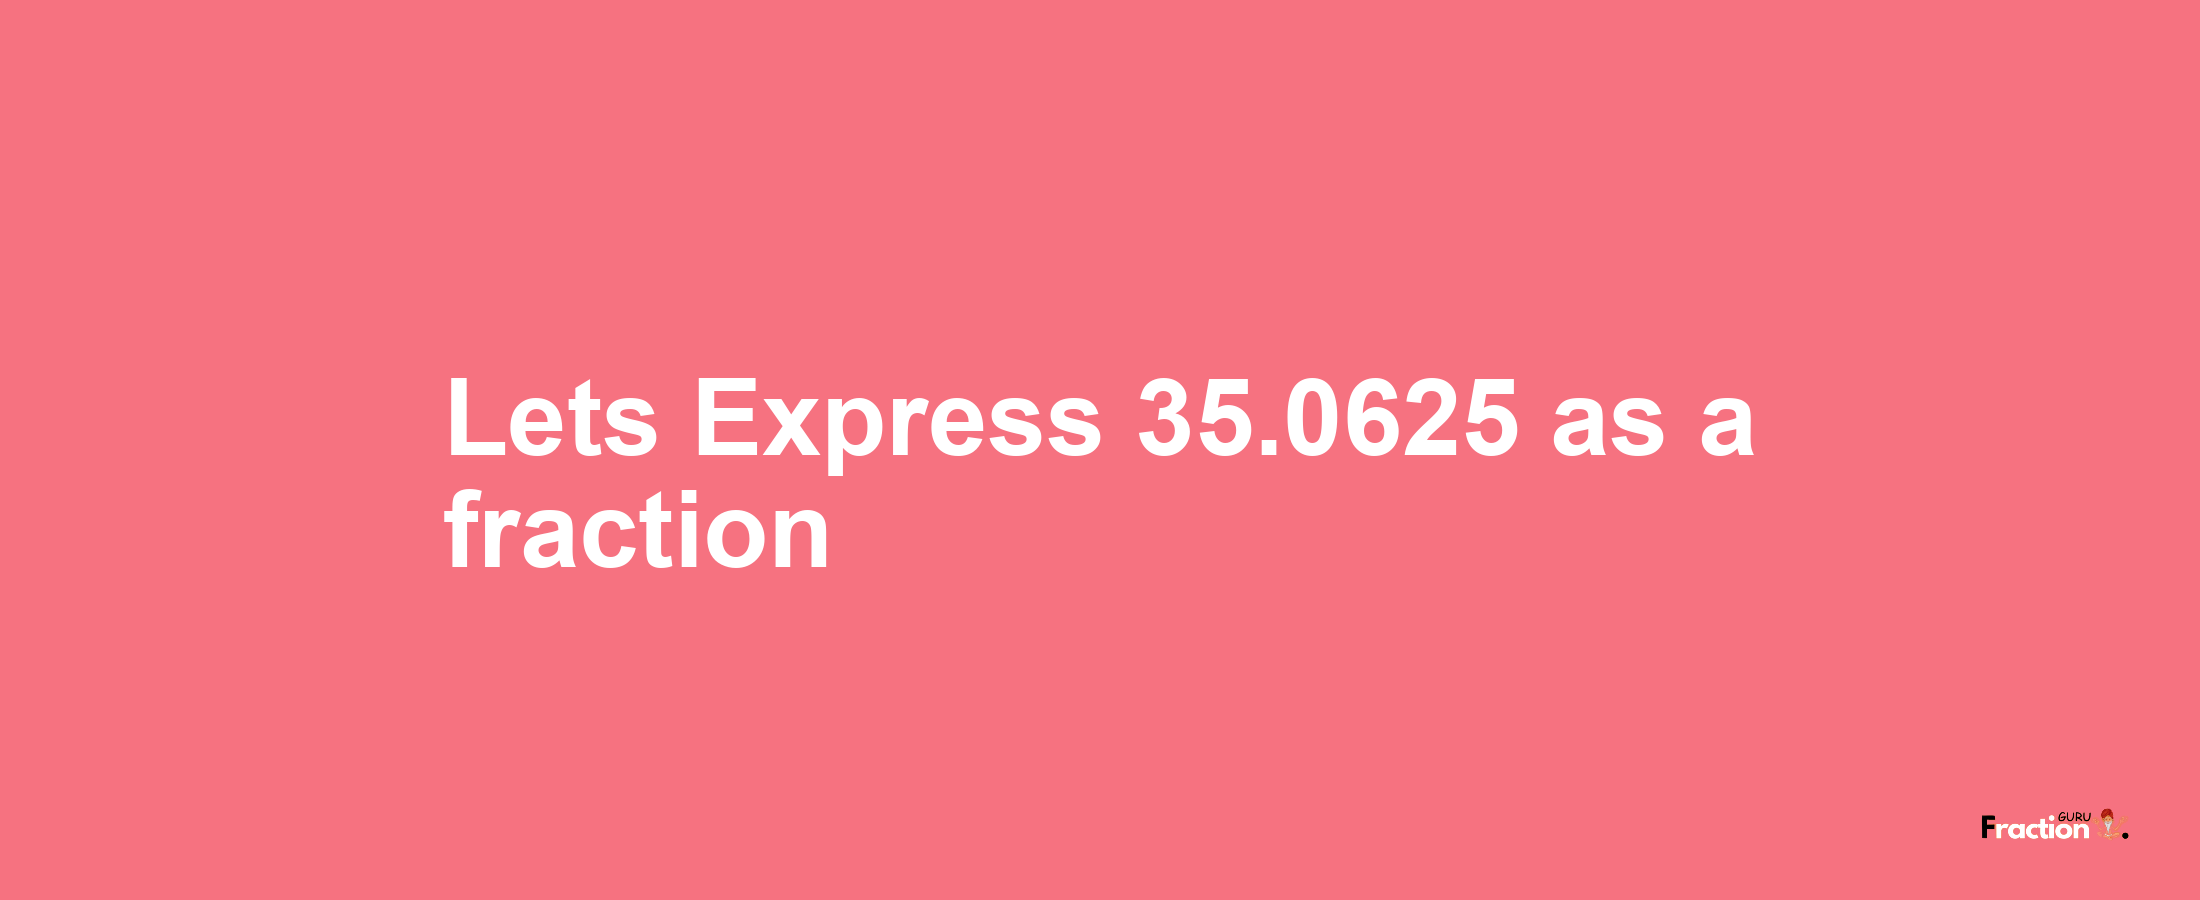 Lets Express 35.0625 as afraction